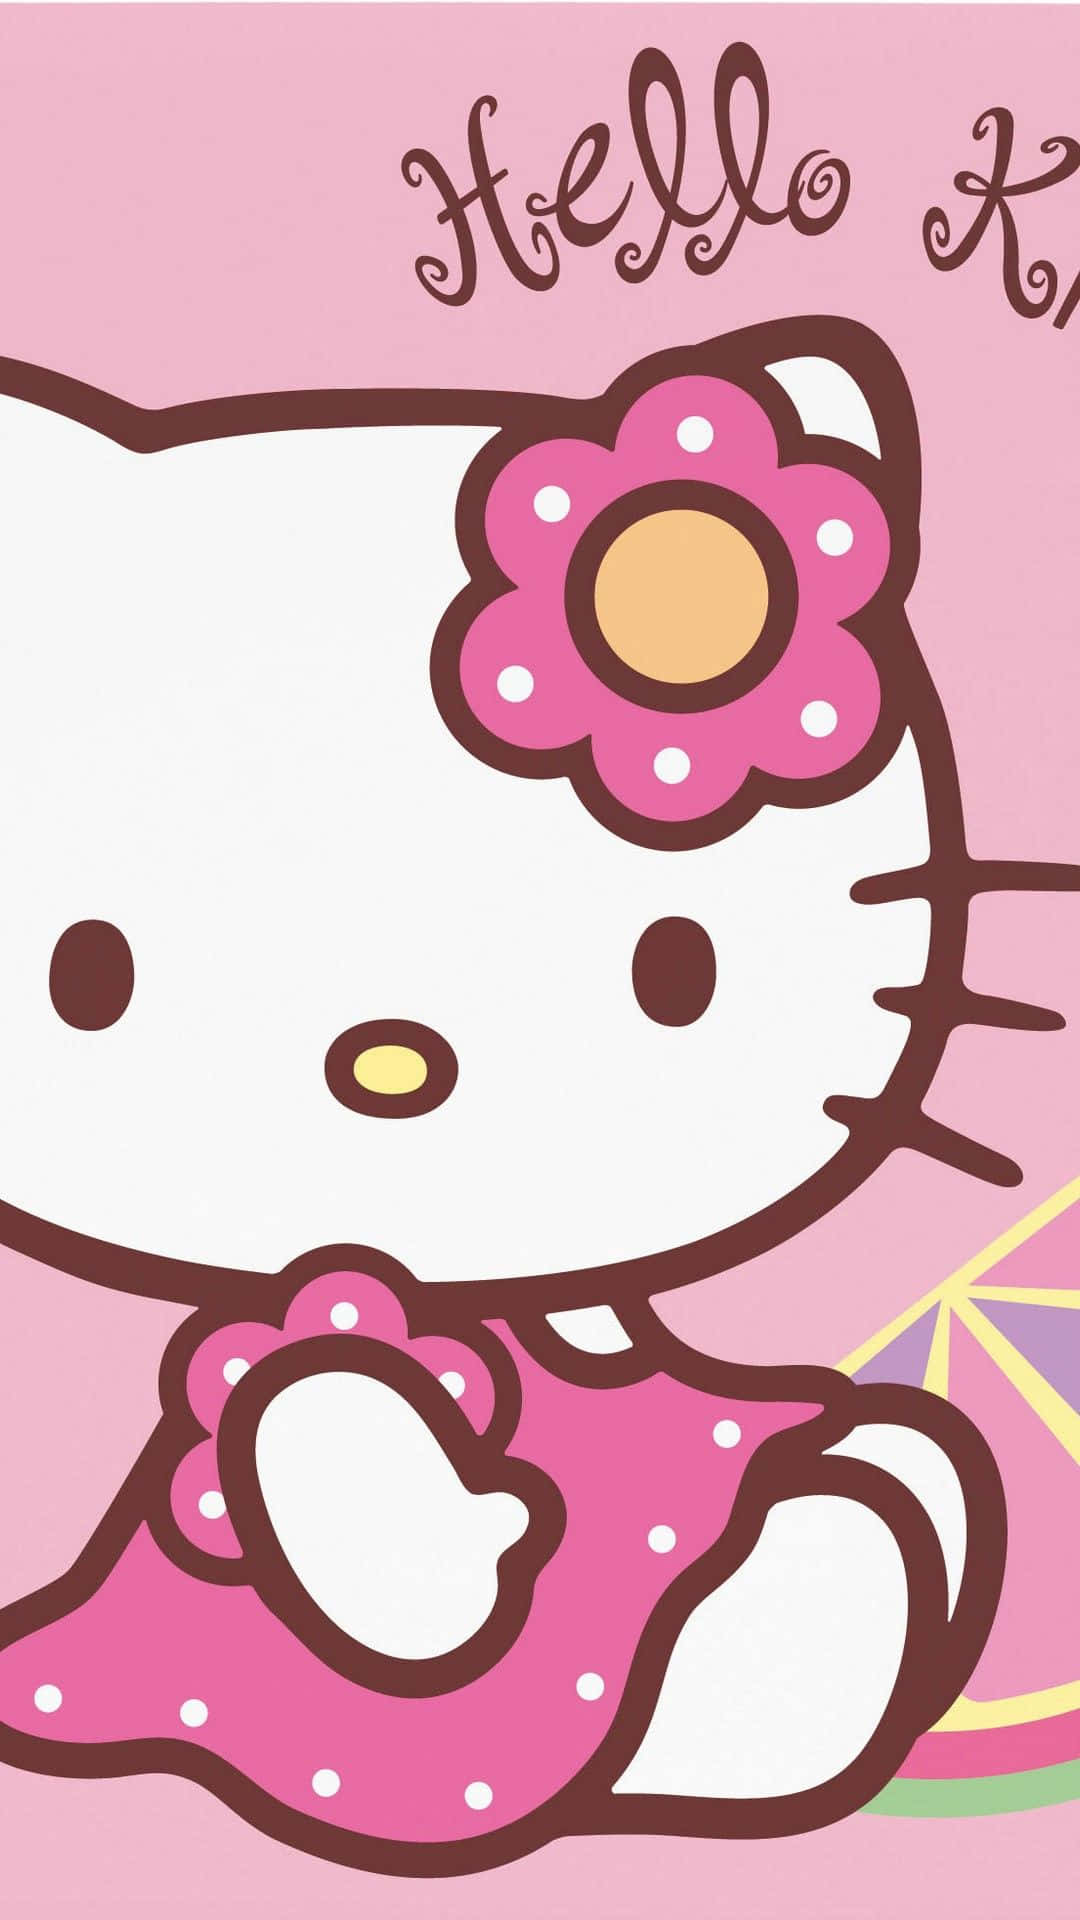 Get ready to make the cutest calls ever with the Sanrio Phone Wallpaper